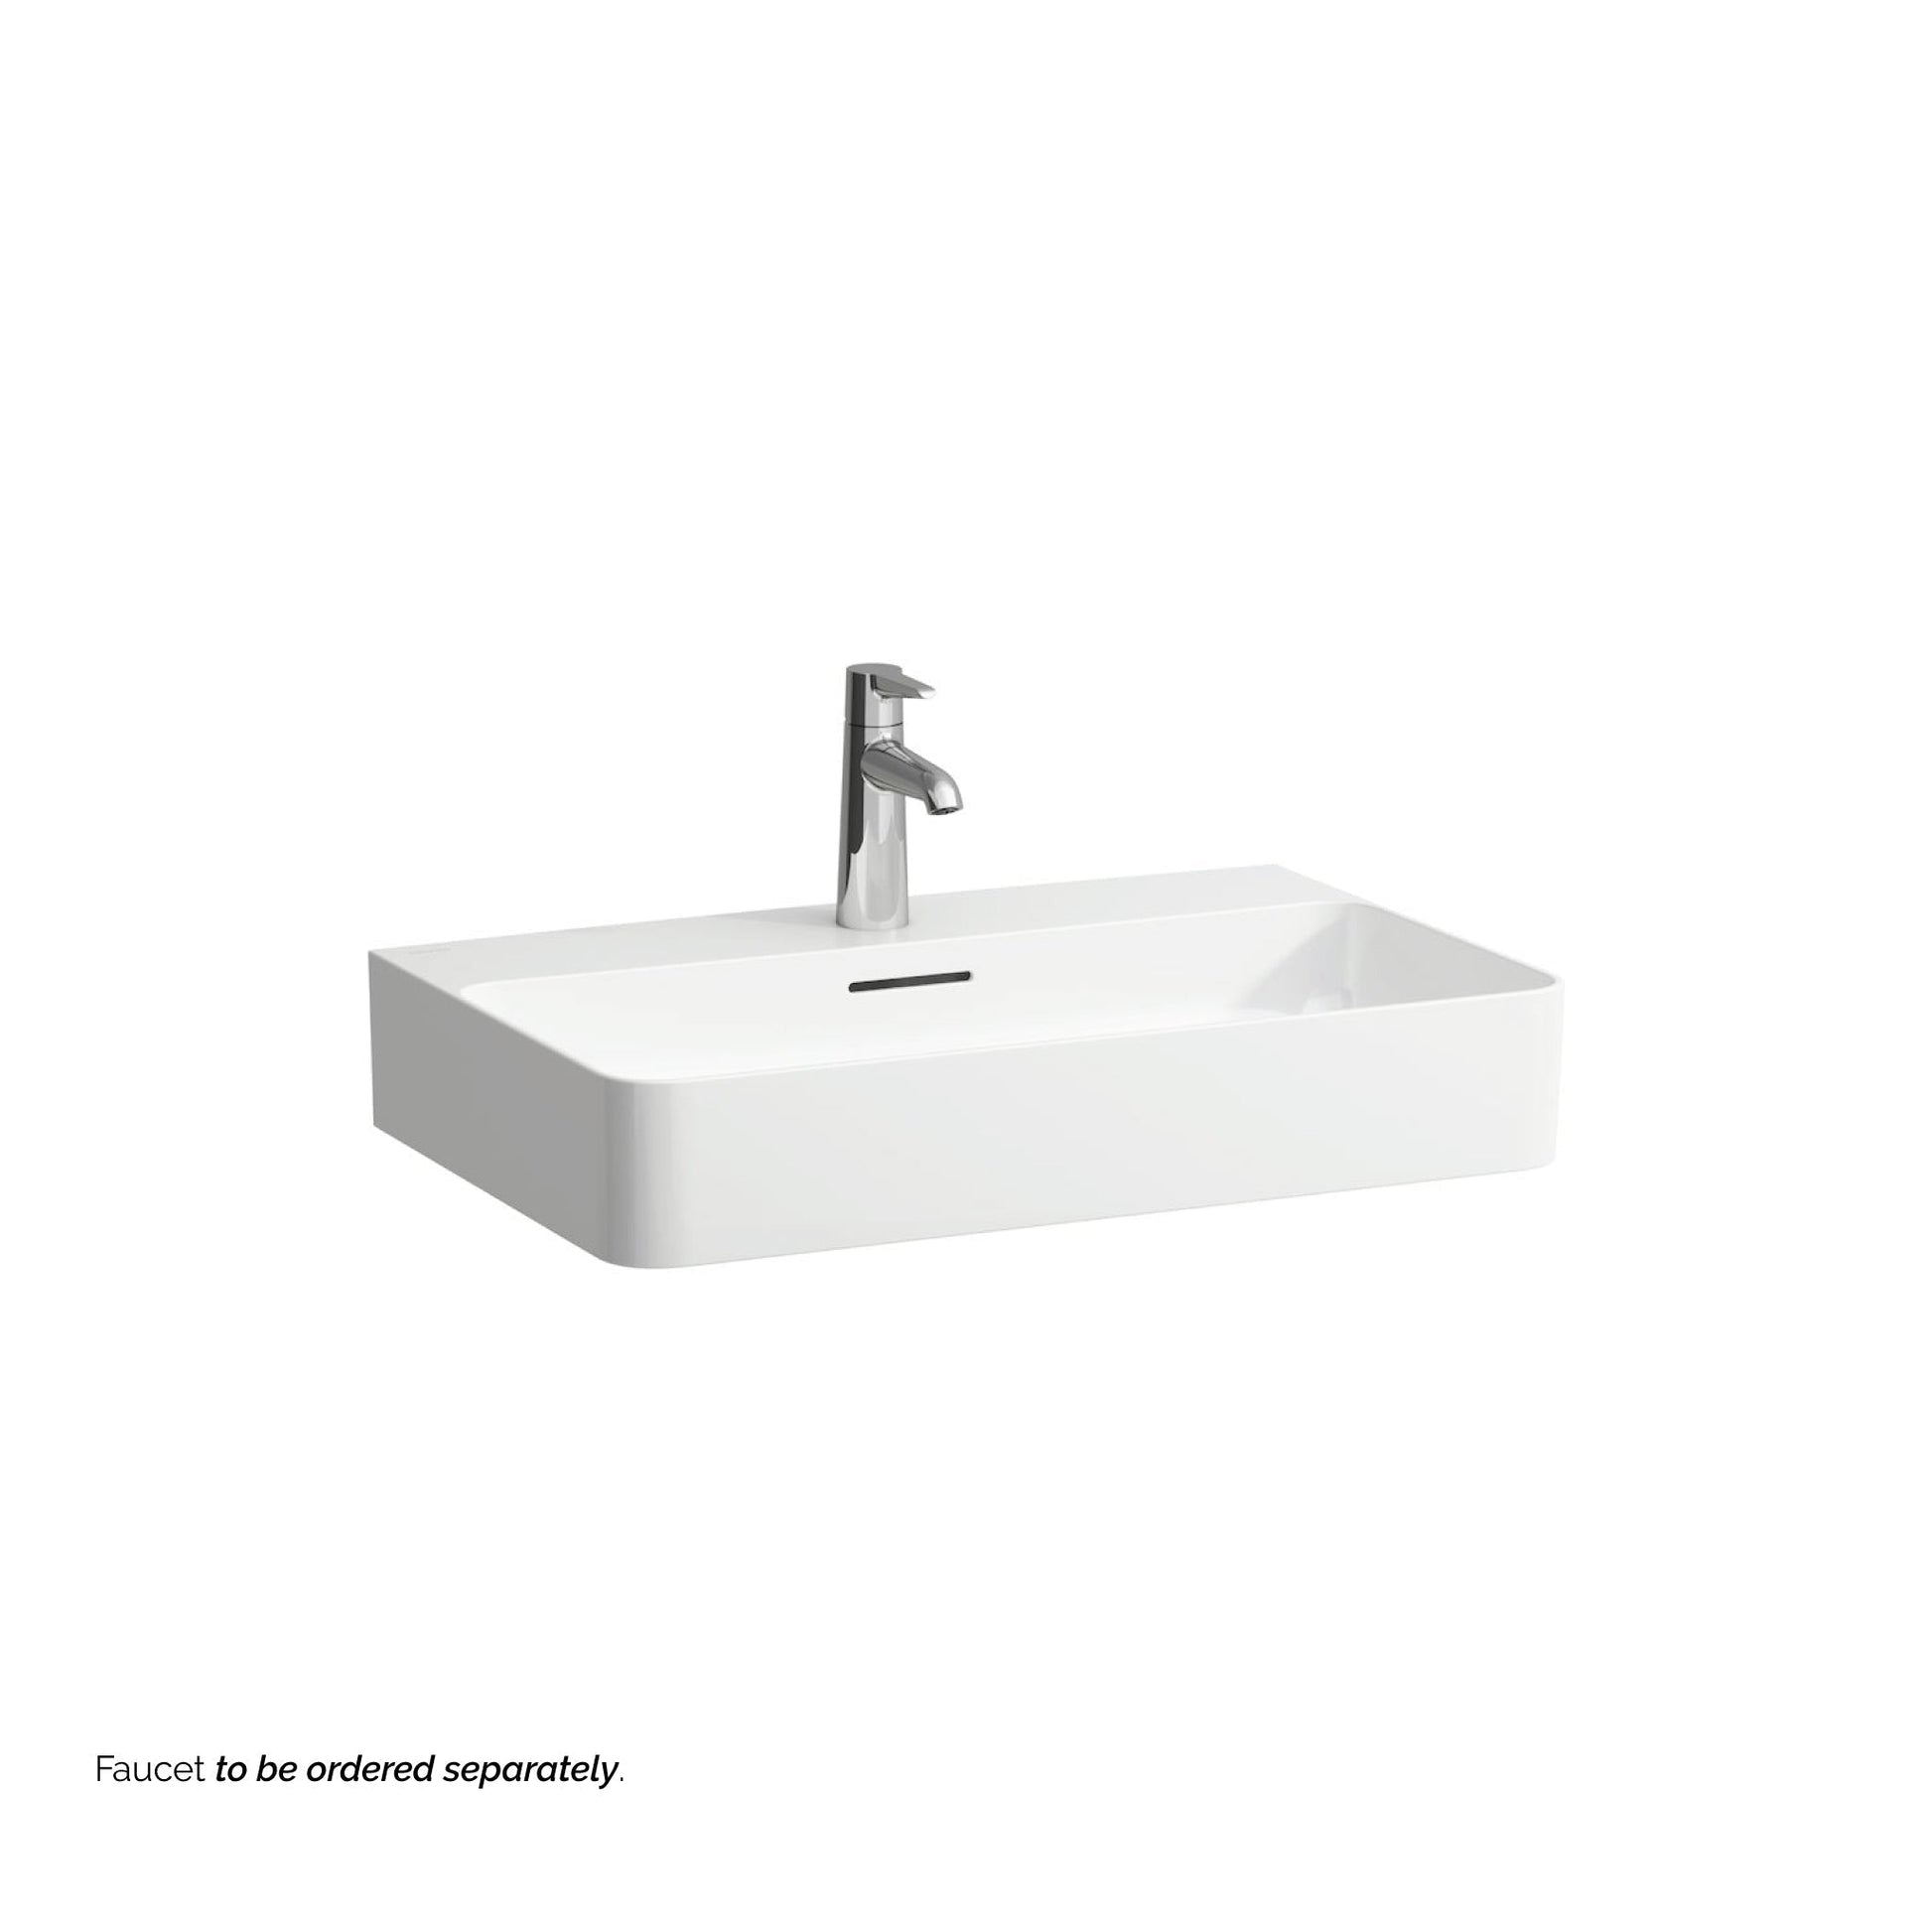 Laufen Val 26" x 17" Matte White Ceramic Countertop Bathroom Sink With Faucet Hole